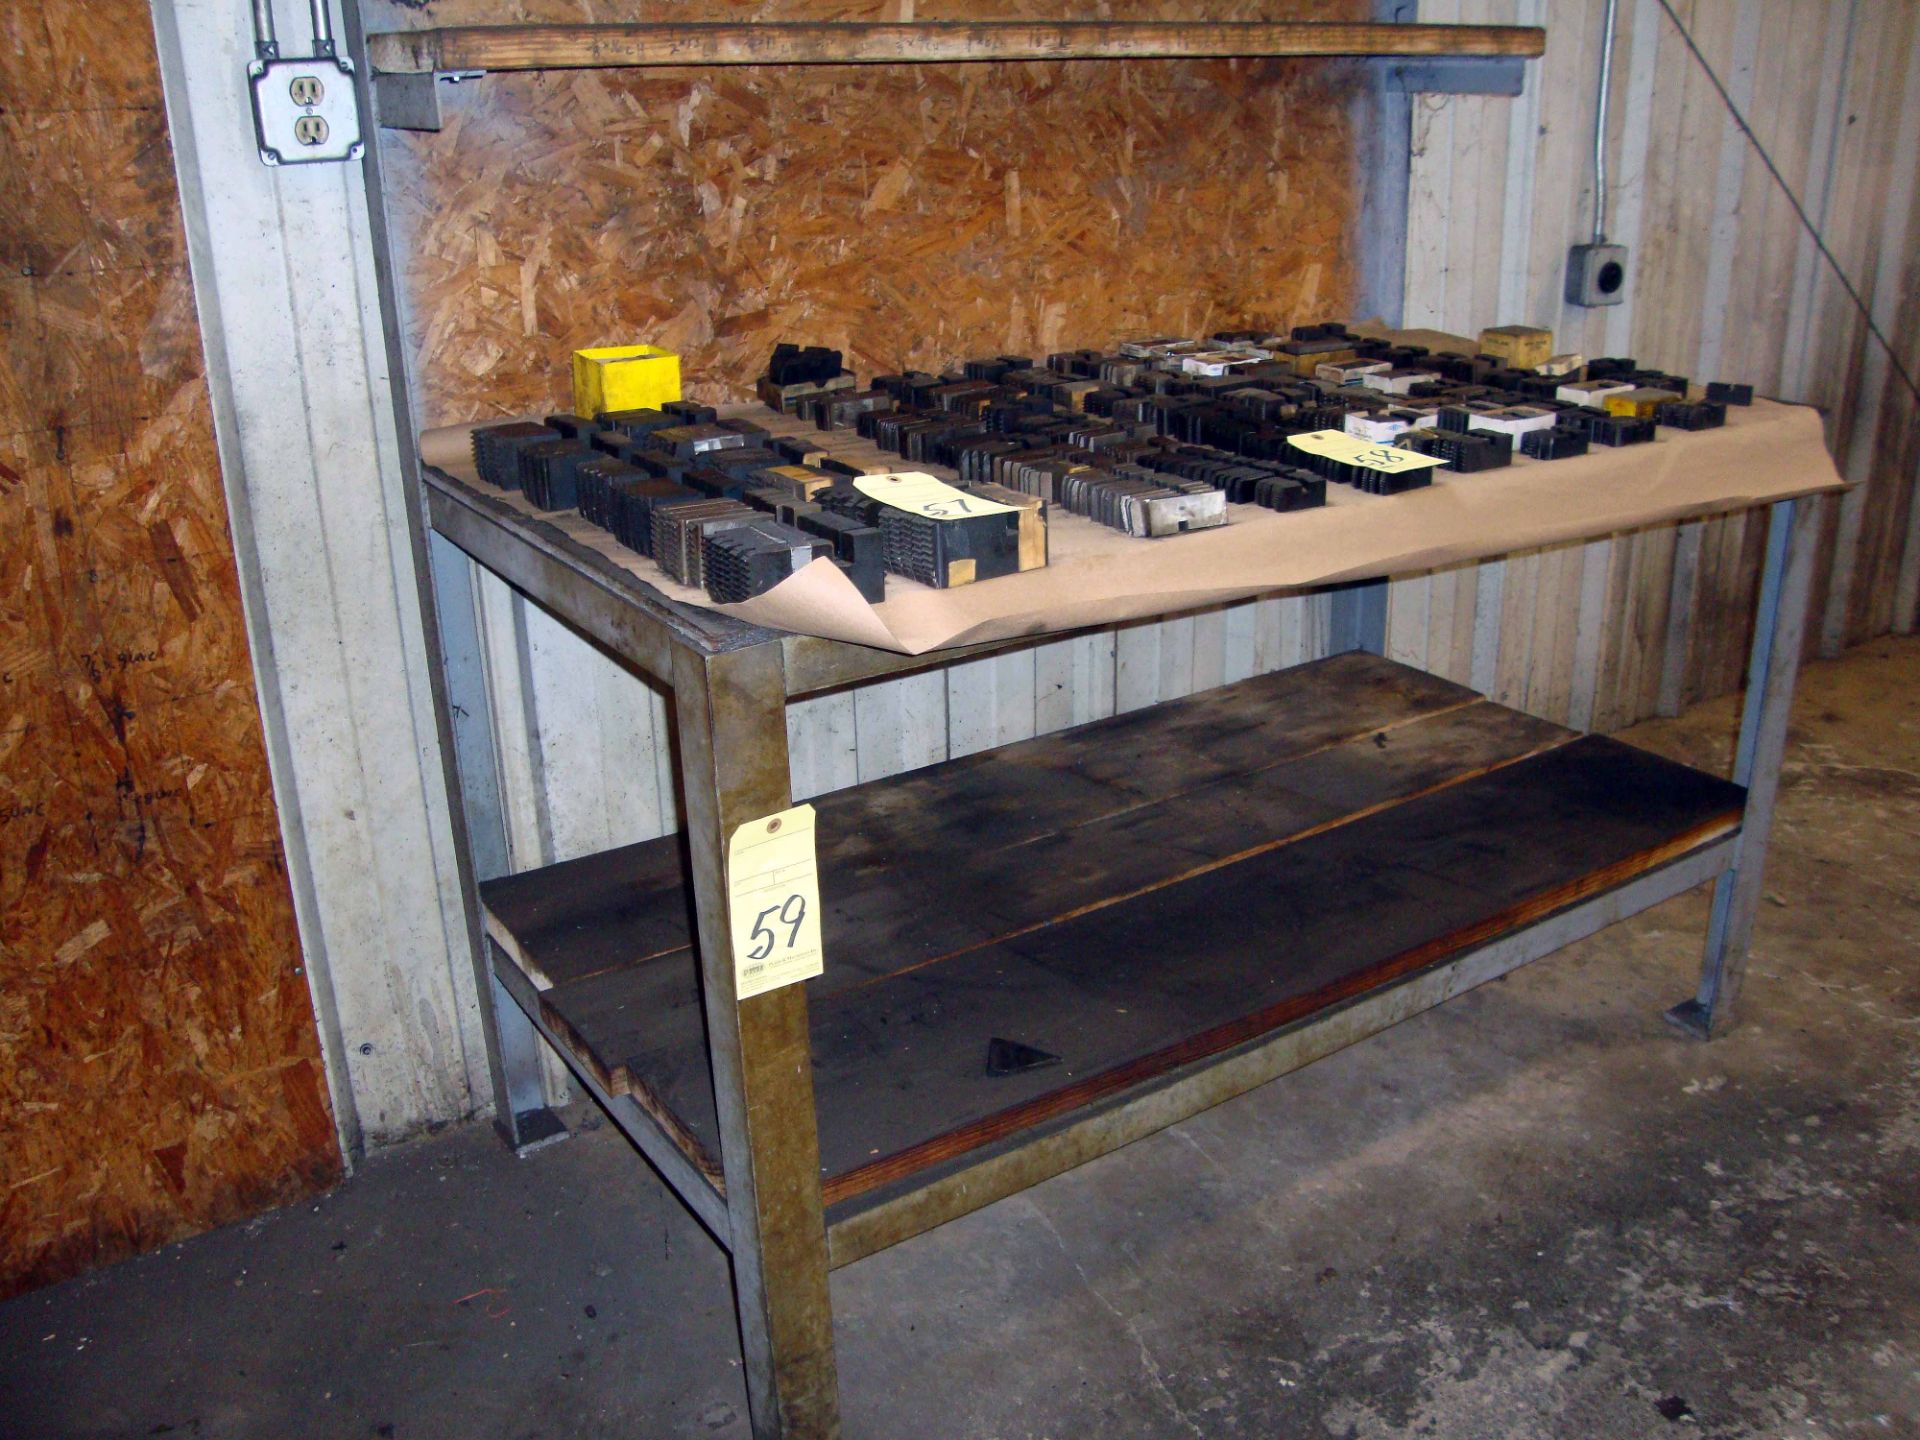 STEEL WORKTABLE, 32" x 58", wood top (may not be taken until tooling has been removed)